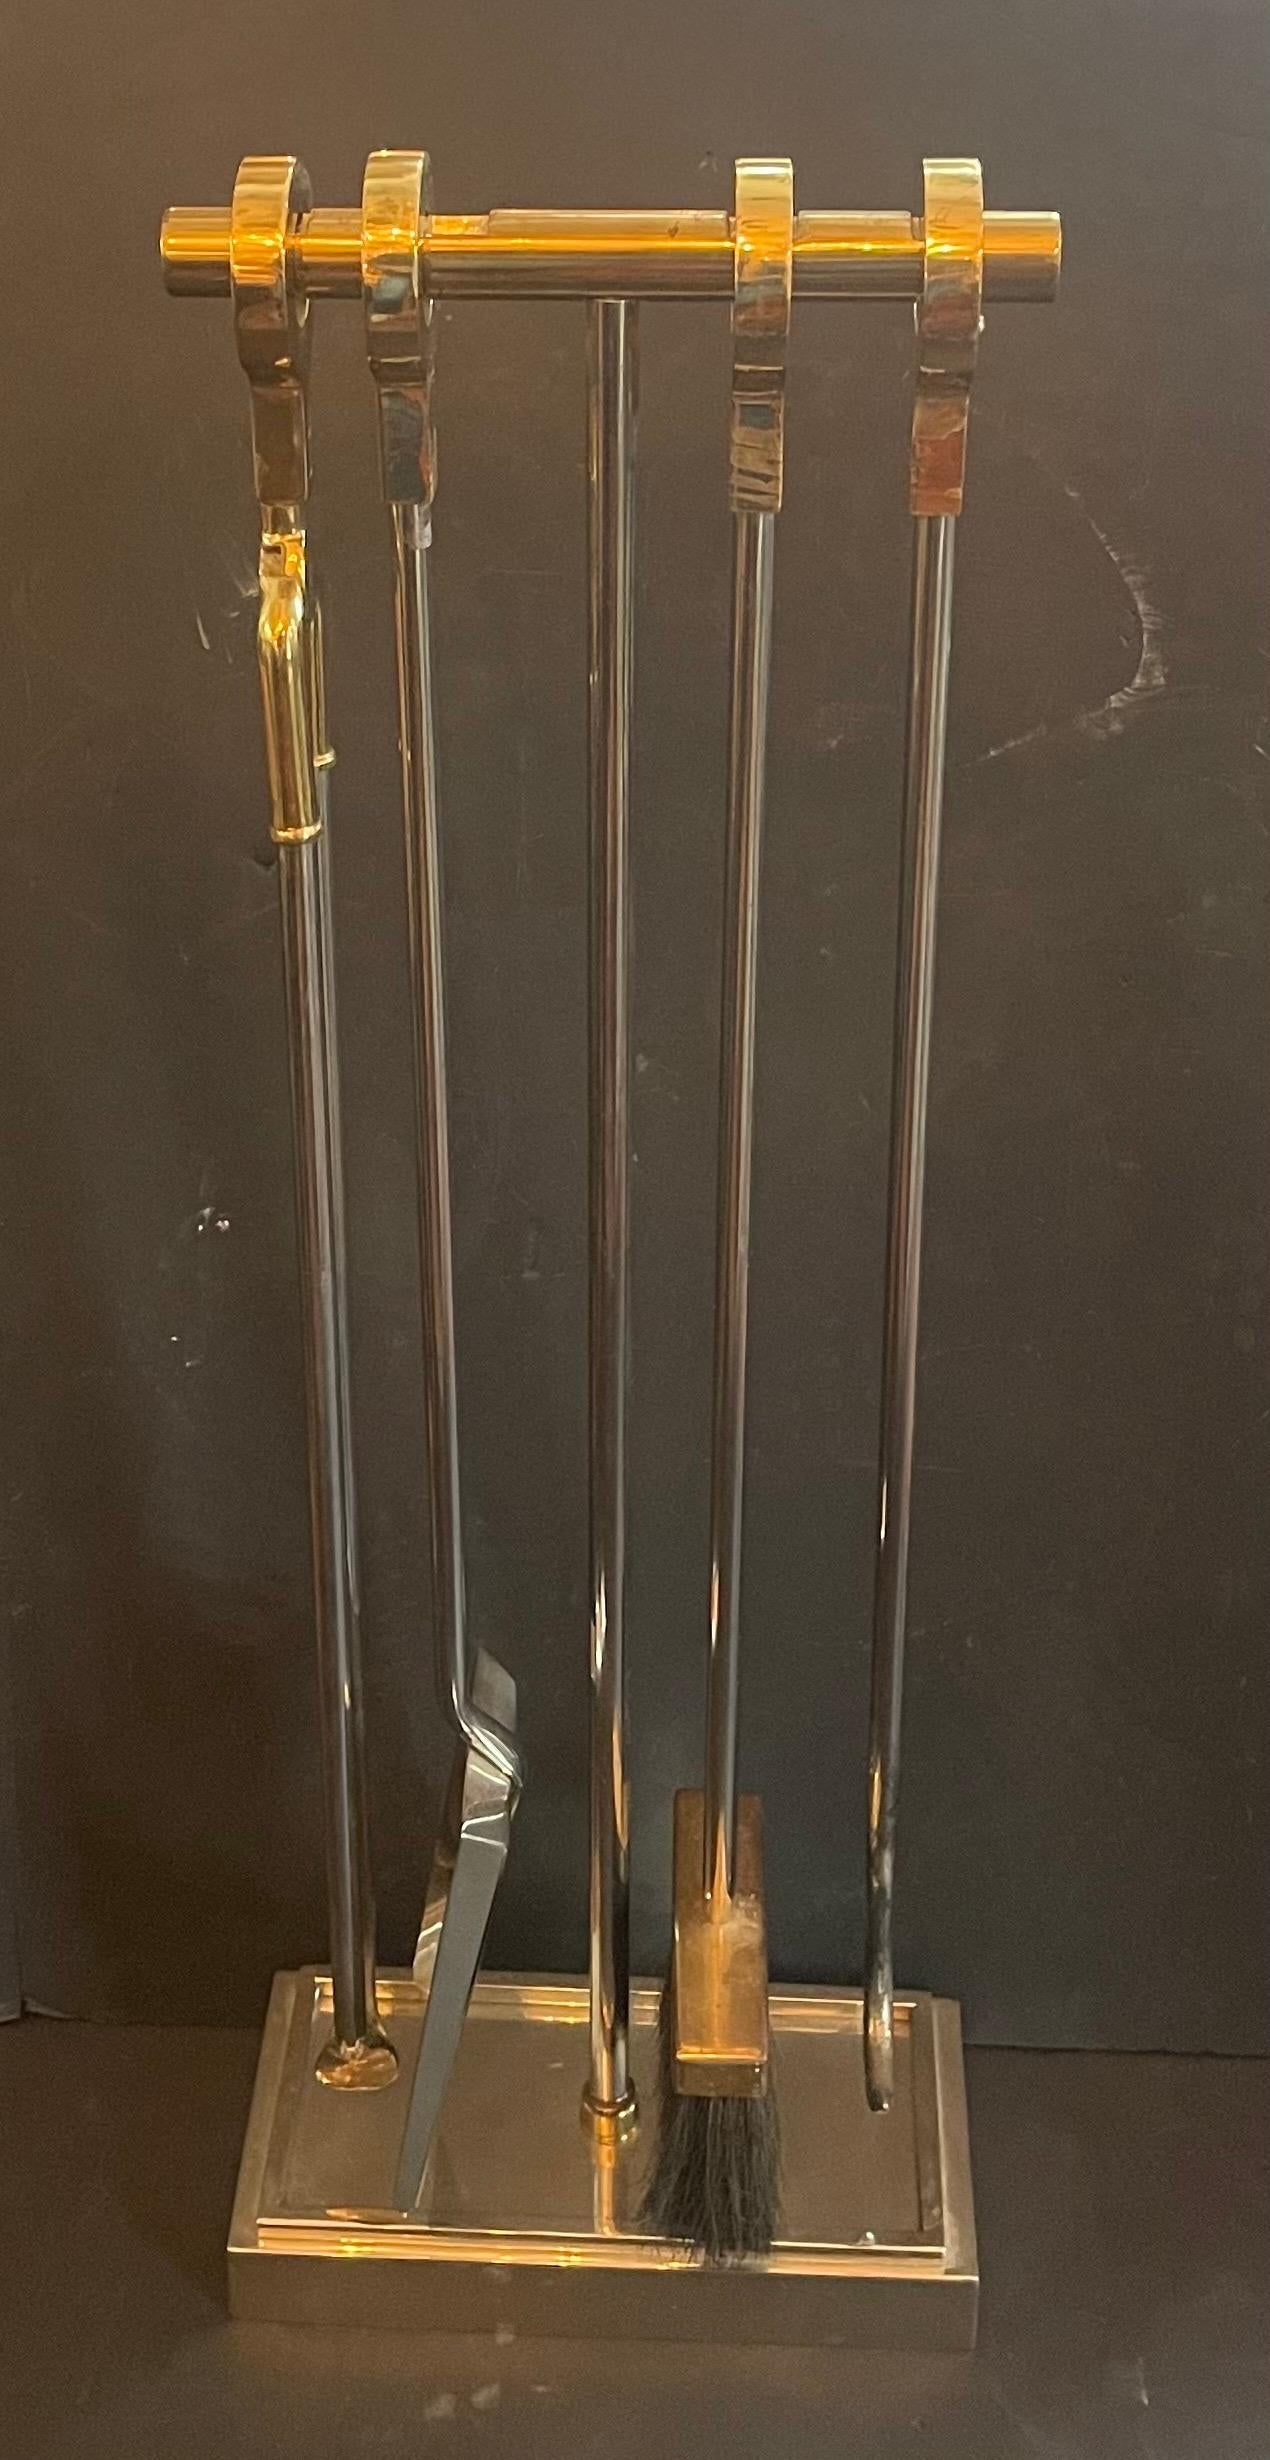 A Wonderful Mid-Century Modern Two Toned Polished Nickel & bronze / brass fireplace tool set Danny Alessandro.